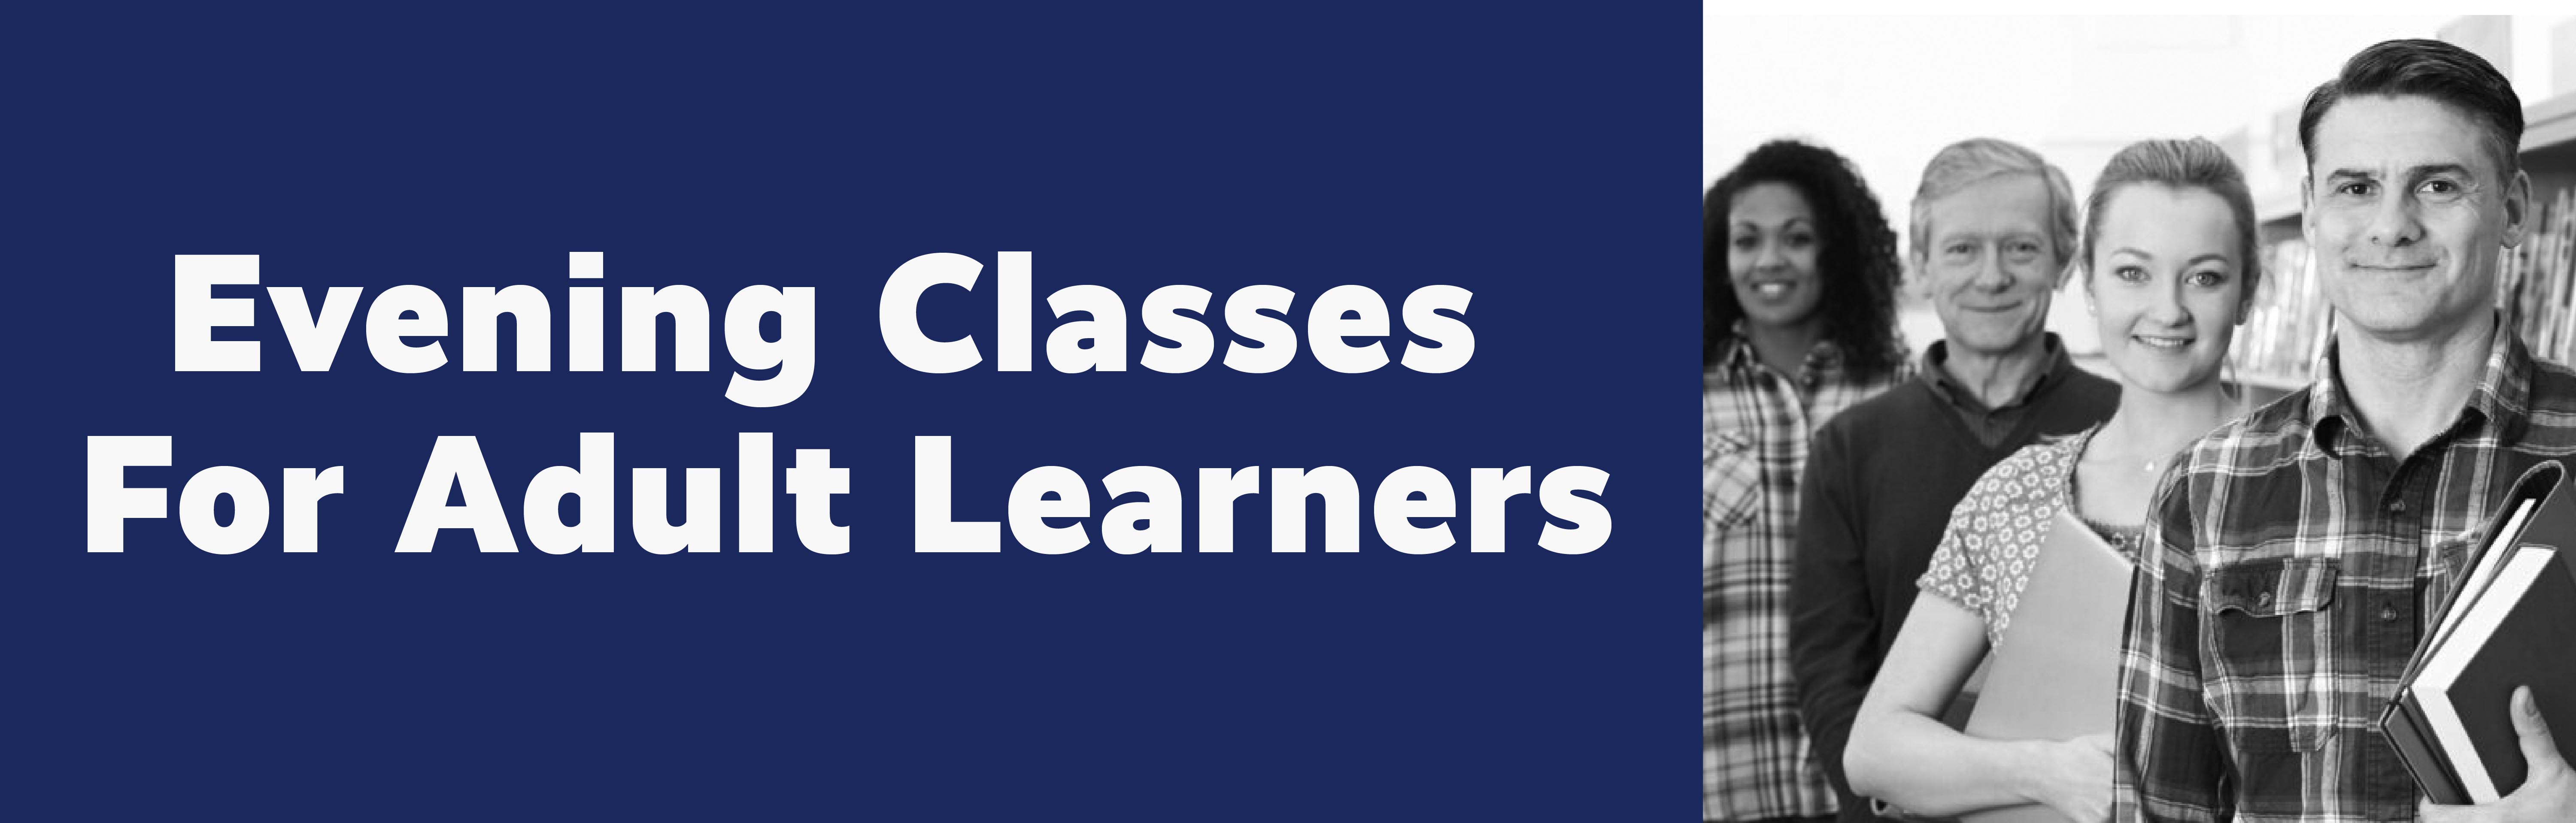 Evening Classes For Adult Learners